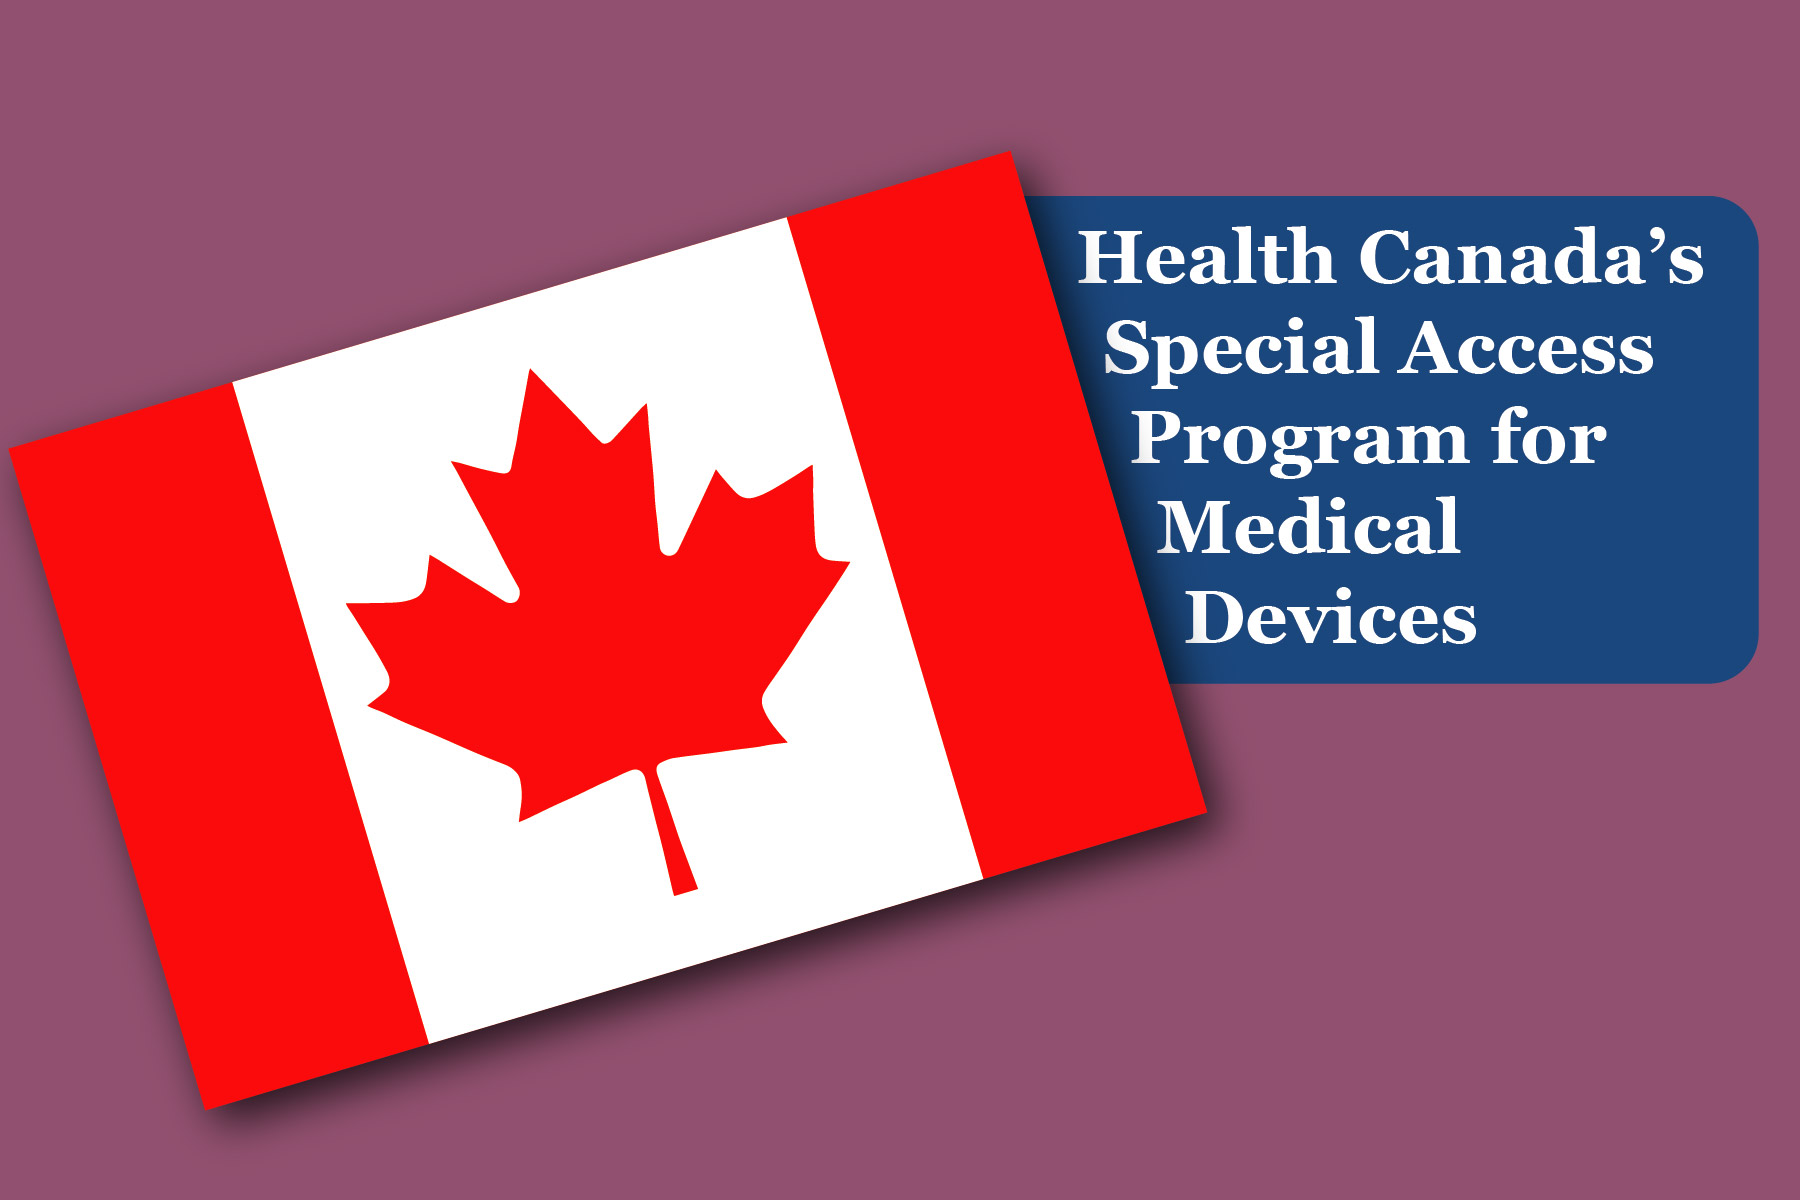 Health Canada’s Special Access Program for Medical Devices